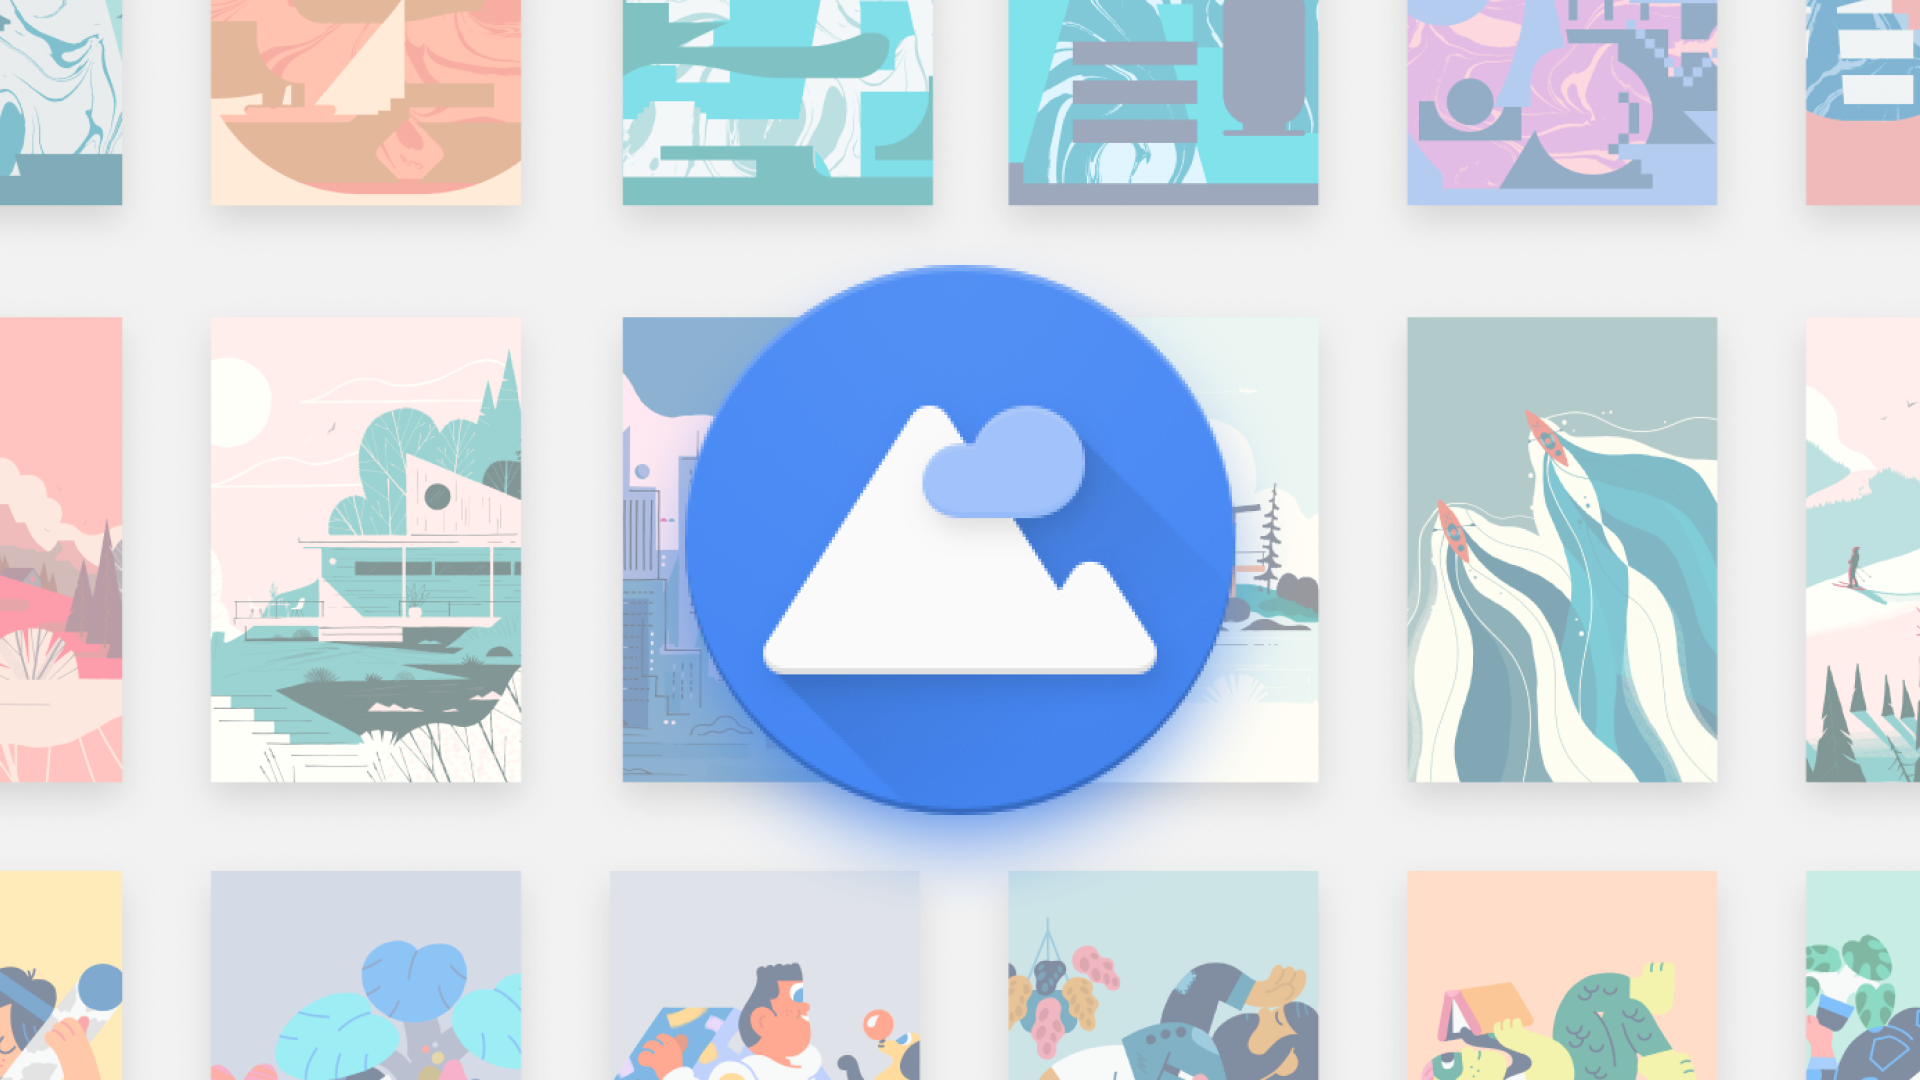 Google published a beautiful new set of wallpaper on Chrome OS, and you can download them